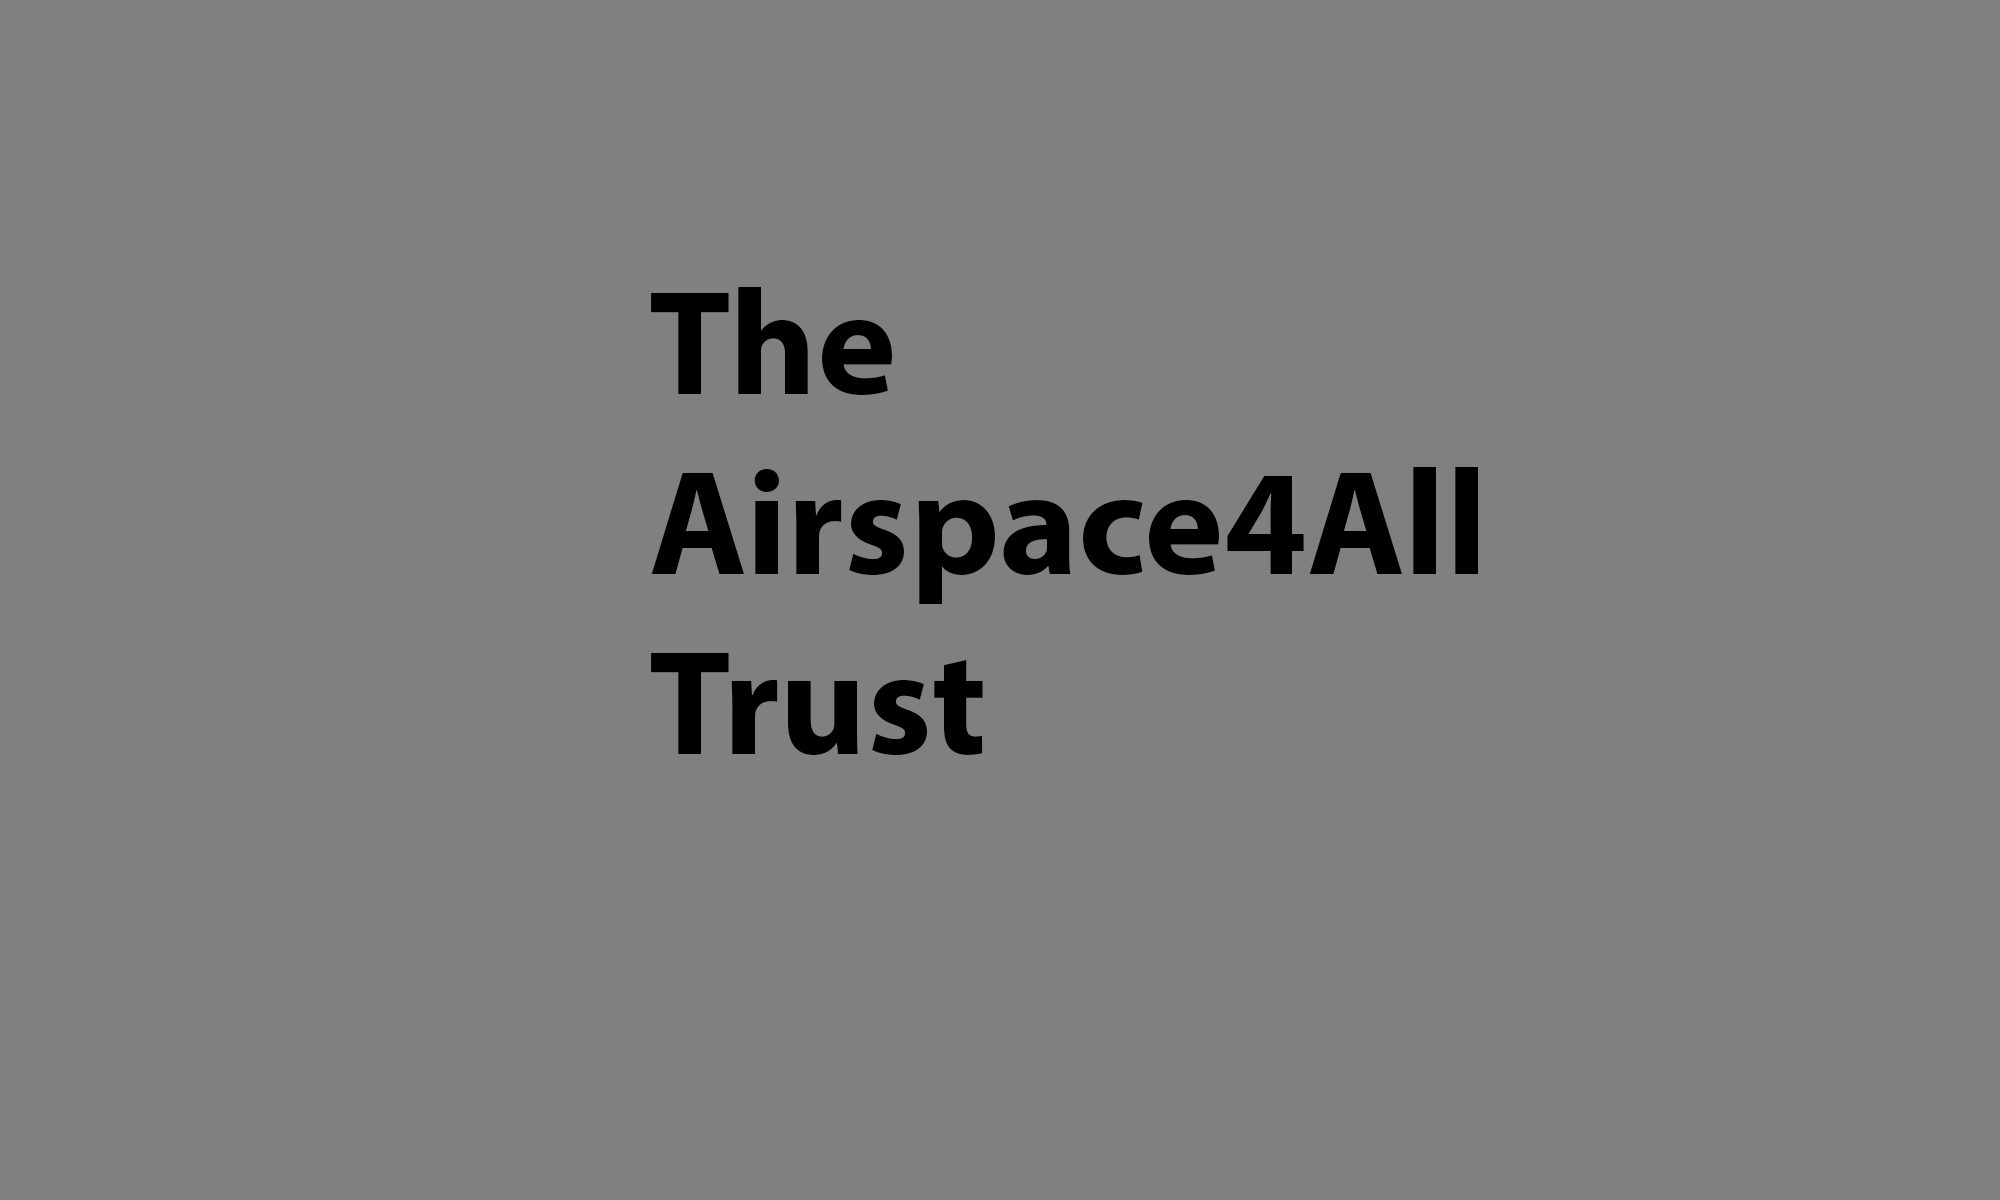 The Airspace4All Trust